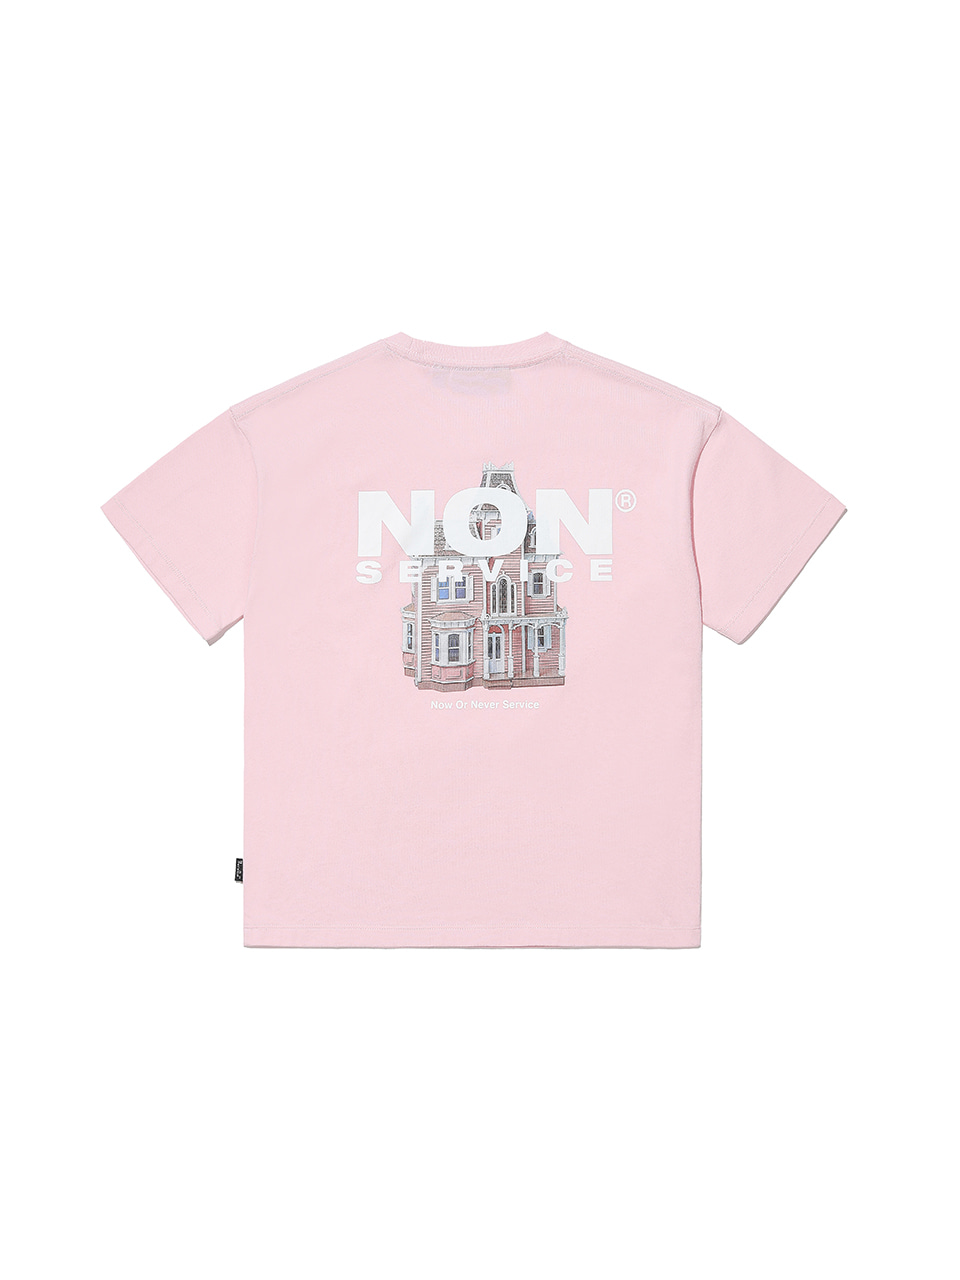 OVER FIT DOLL HOUSE DTP T-SHIRTS PINK